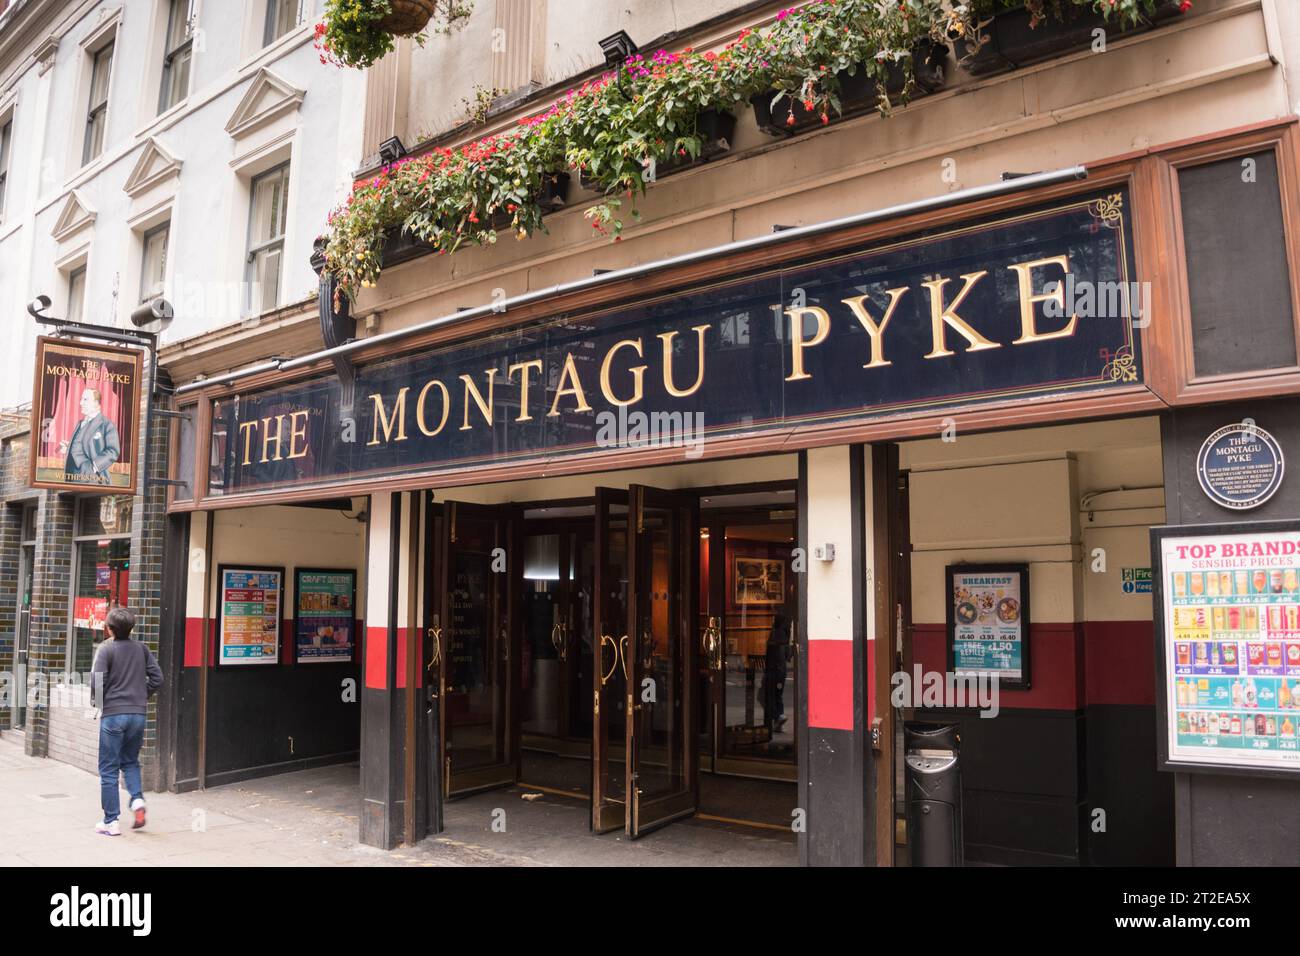 The Montague Pyke public house, a pub belonging to the Wetherspoons chain, Charing Cross Road, London, WC2, England, U.K. Stock Photo